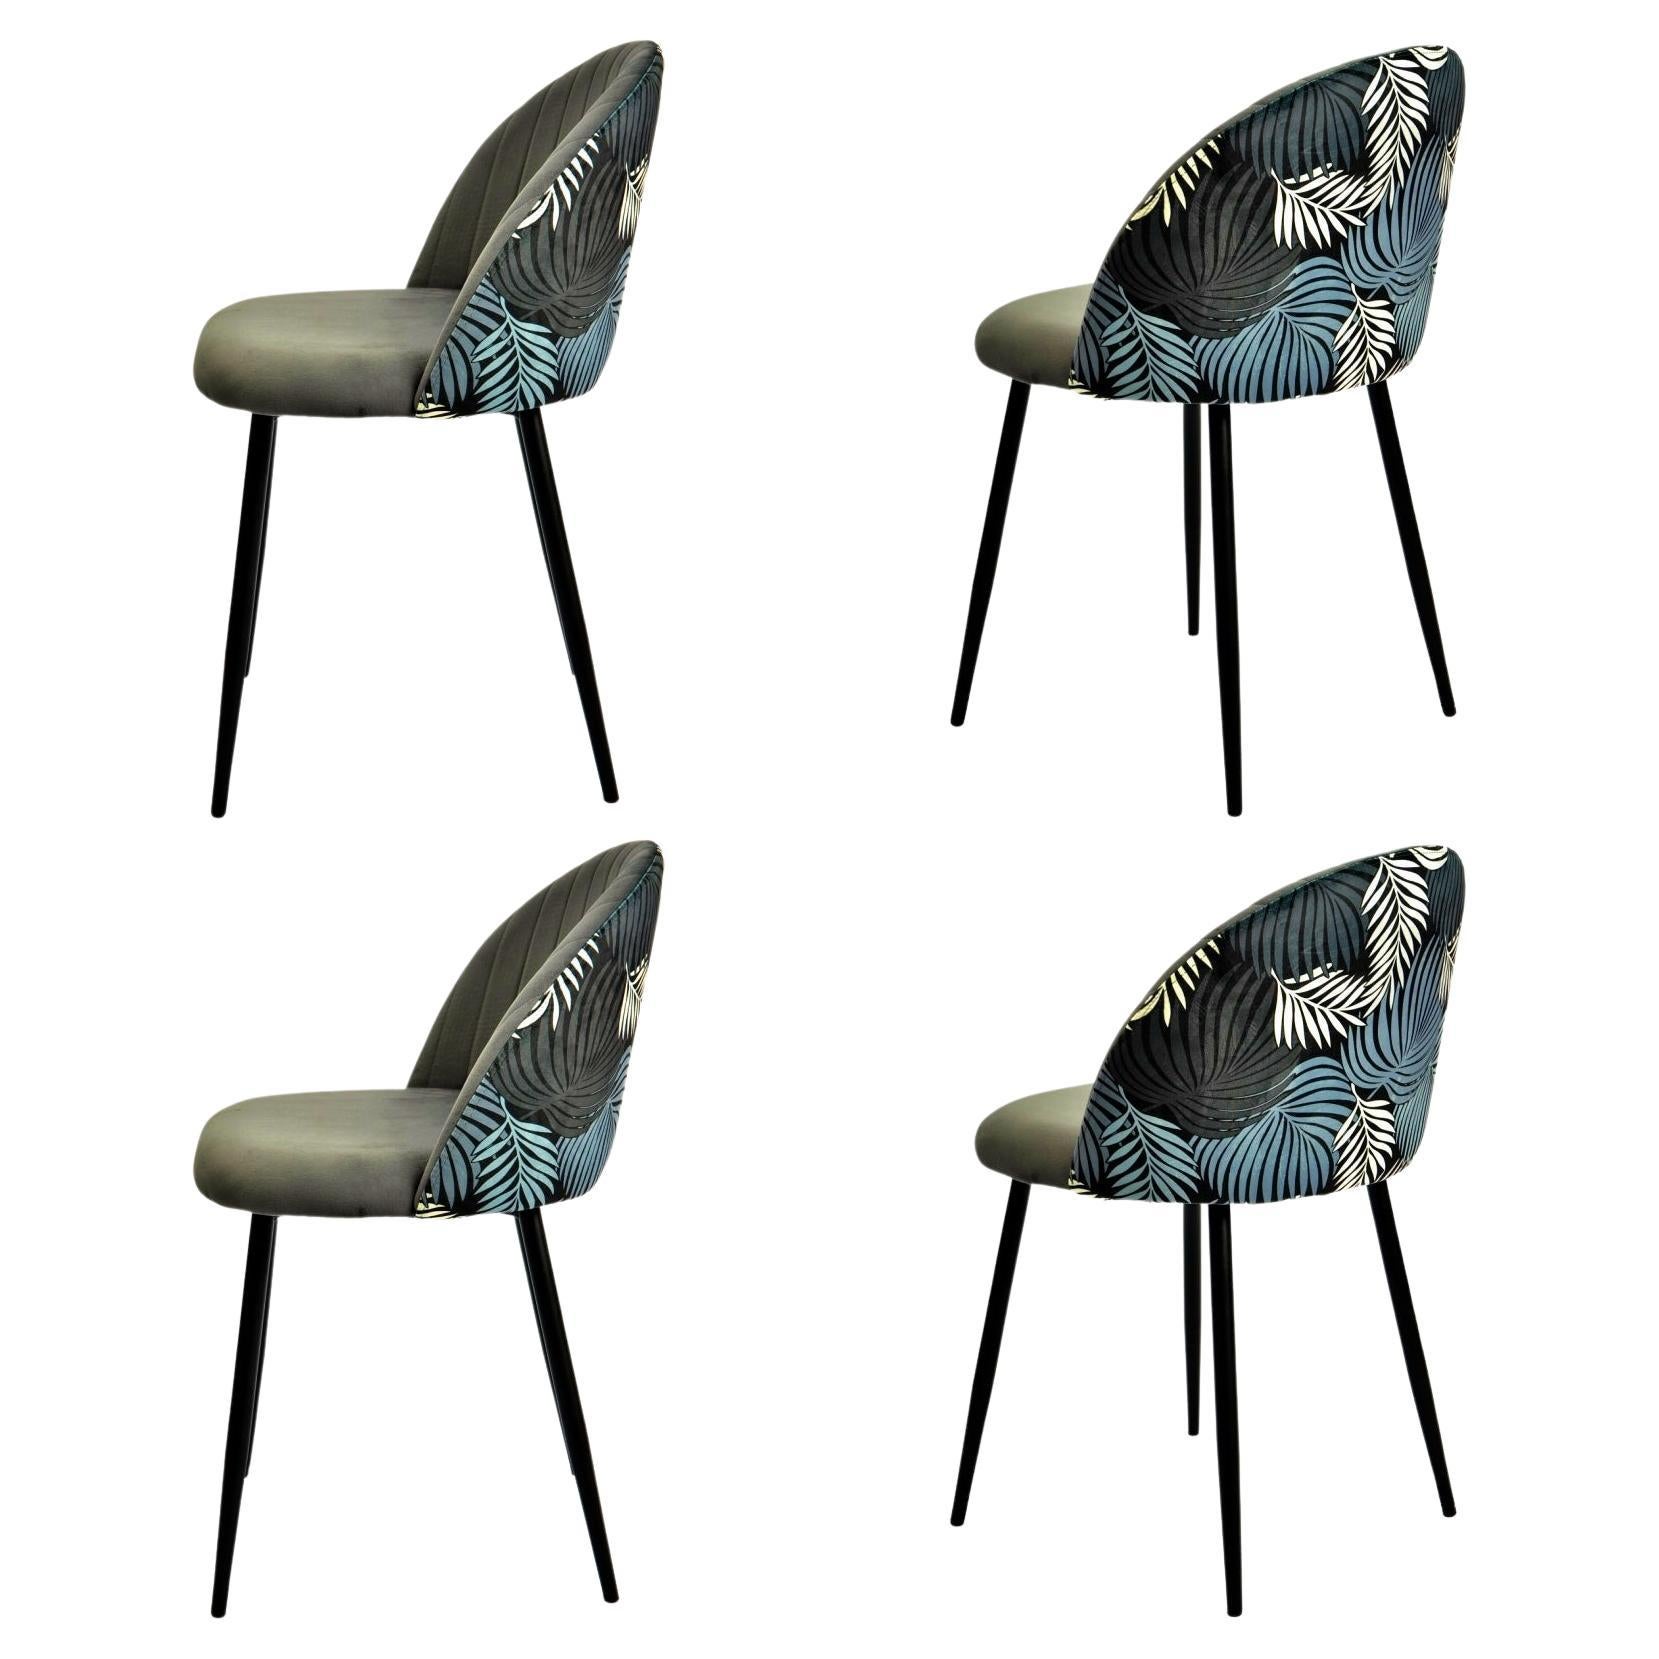 New 4 Gray Velvet Upholstered Chairs with Floral Back